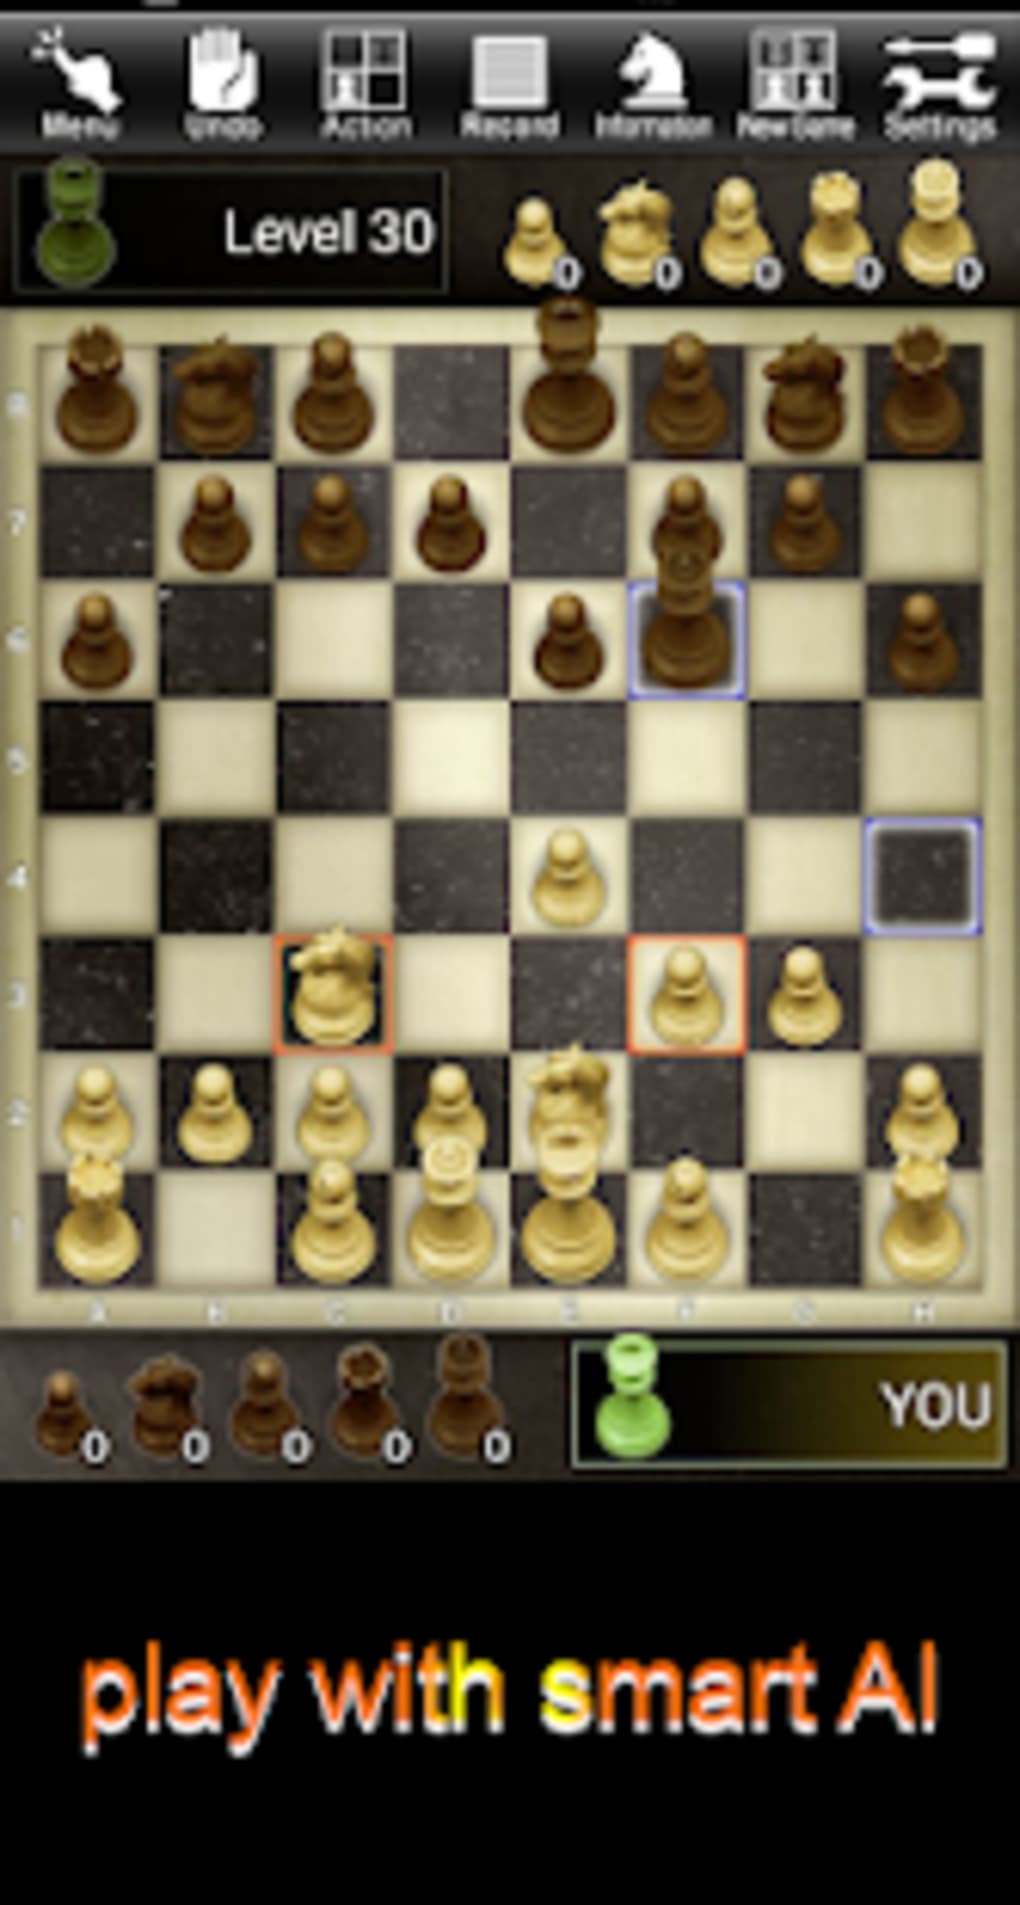 Play Master Chess Online For Free 